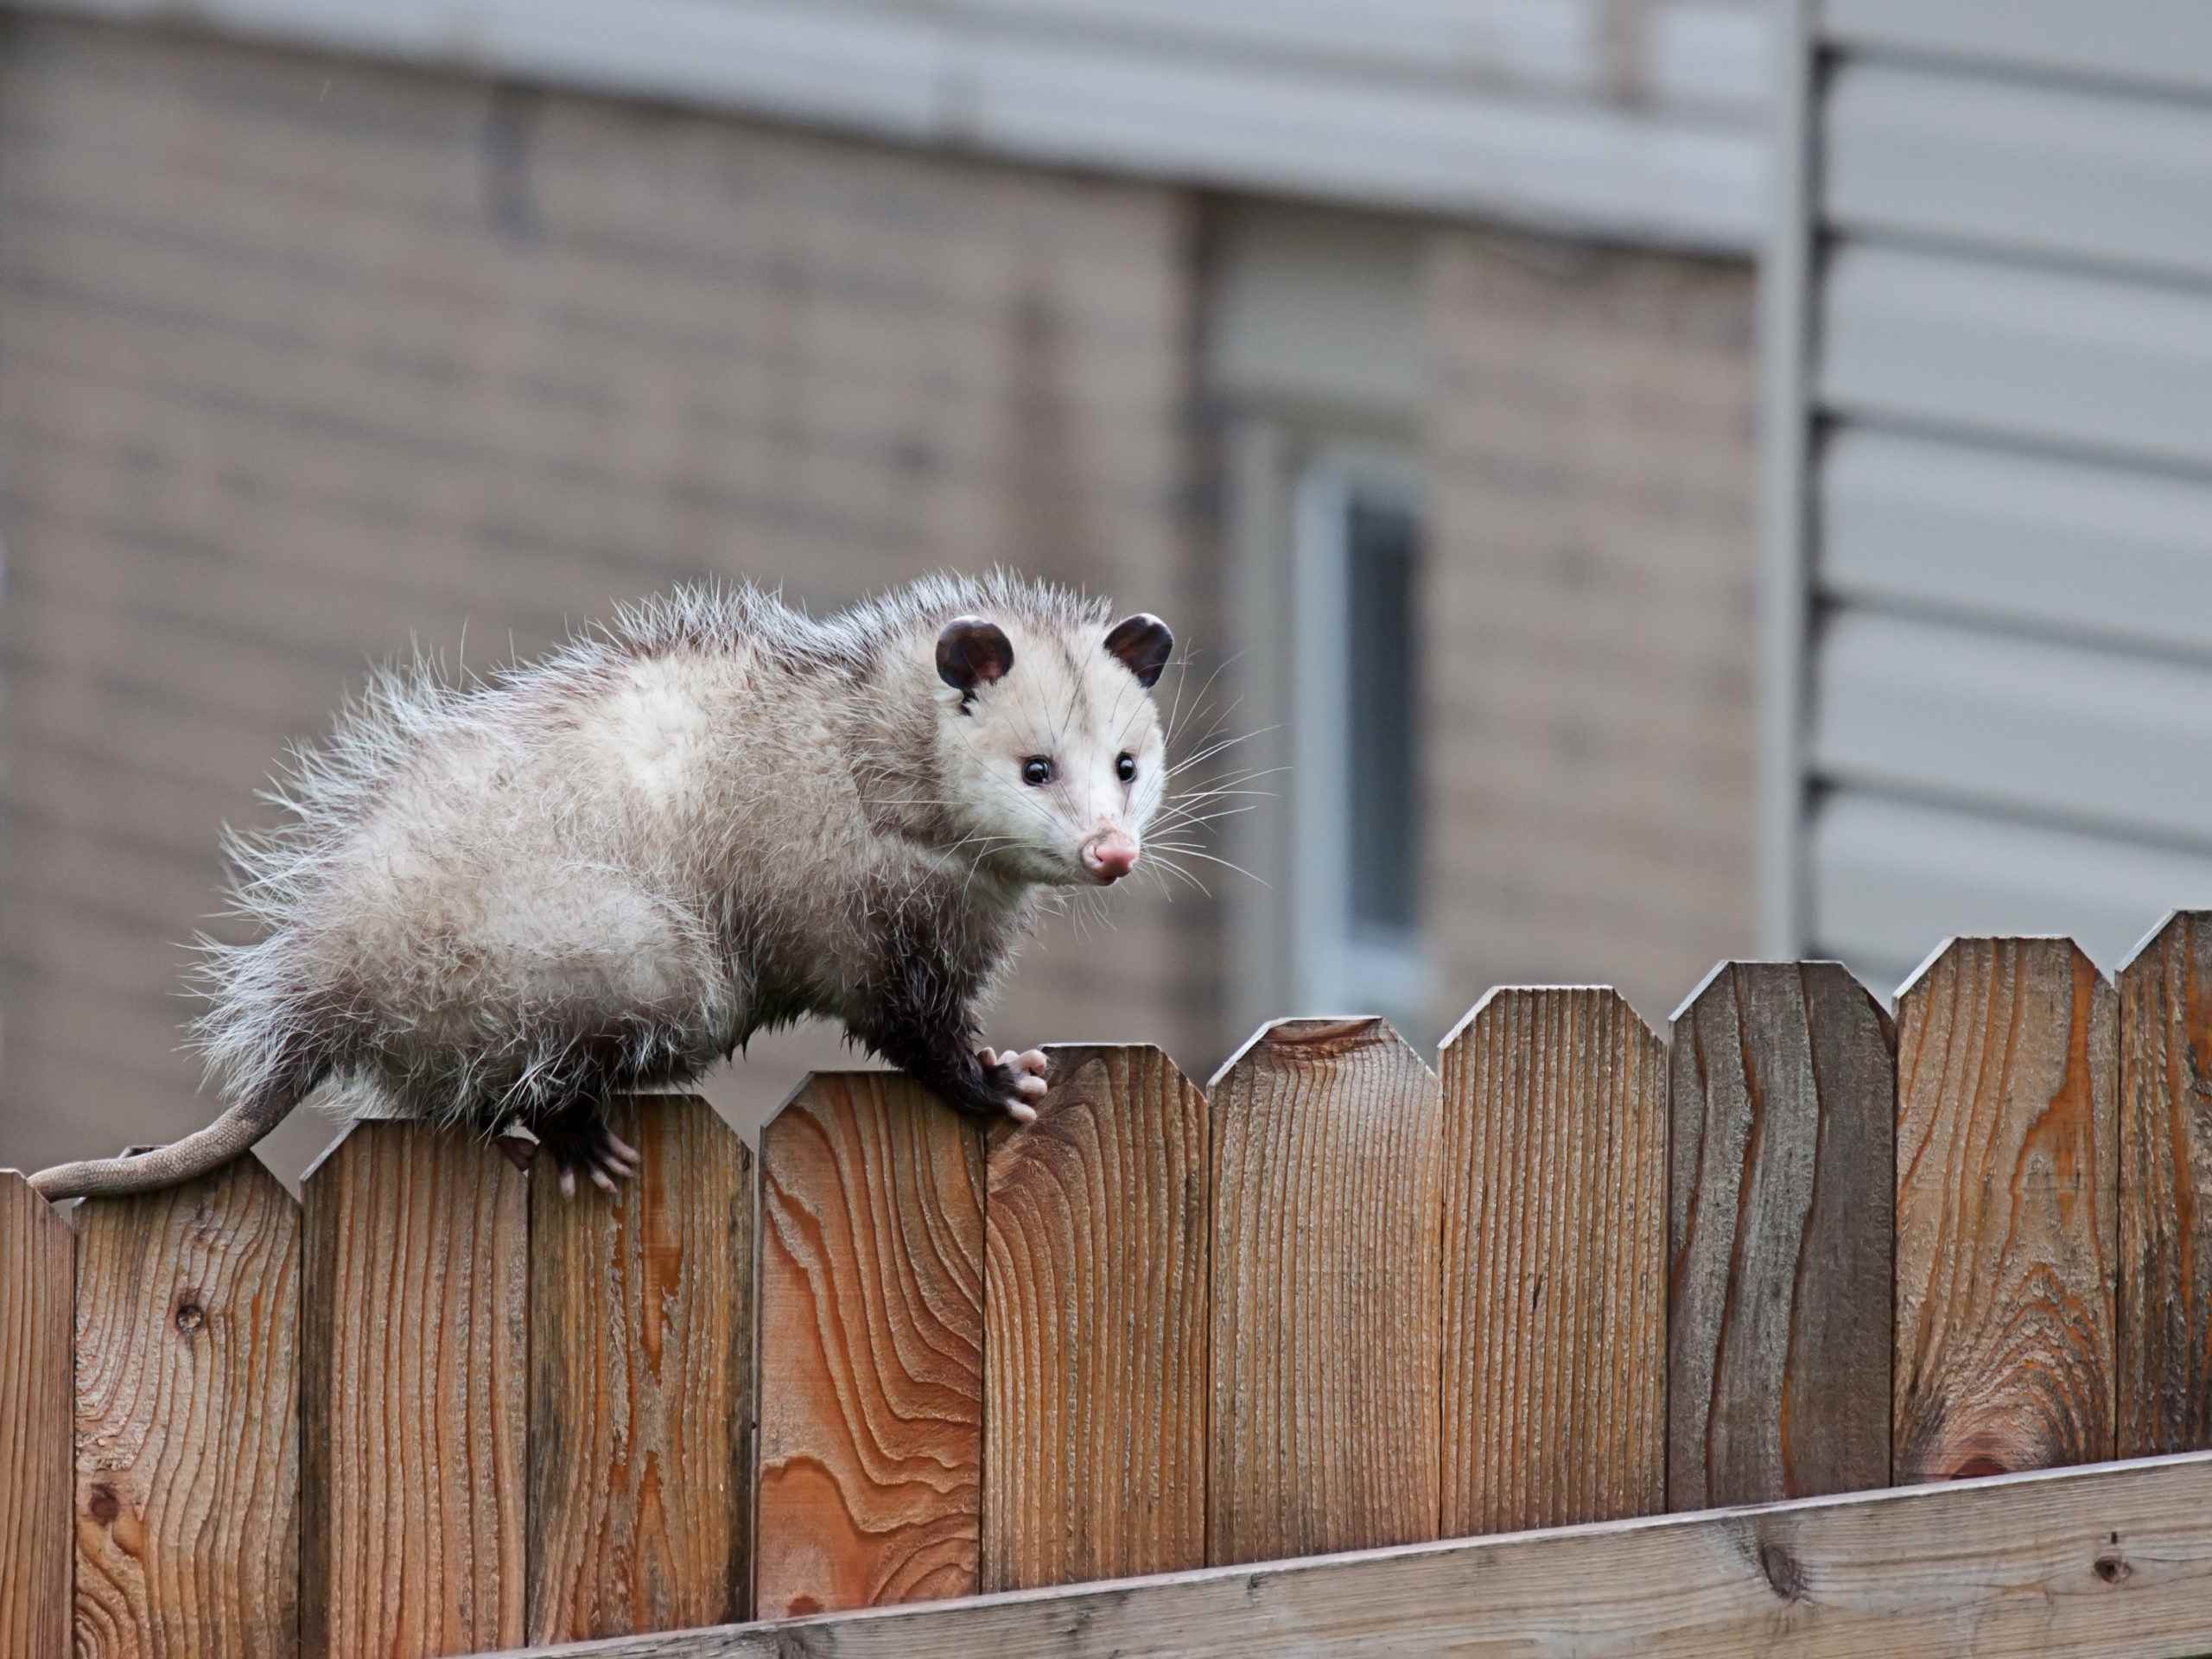 How To Get Rid Of Possums In Your Backyard